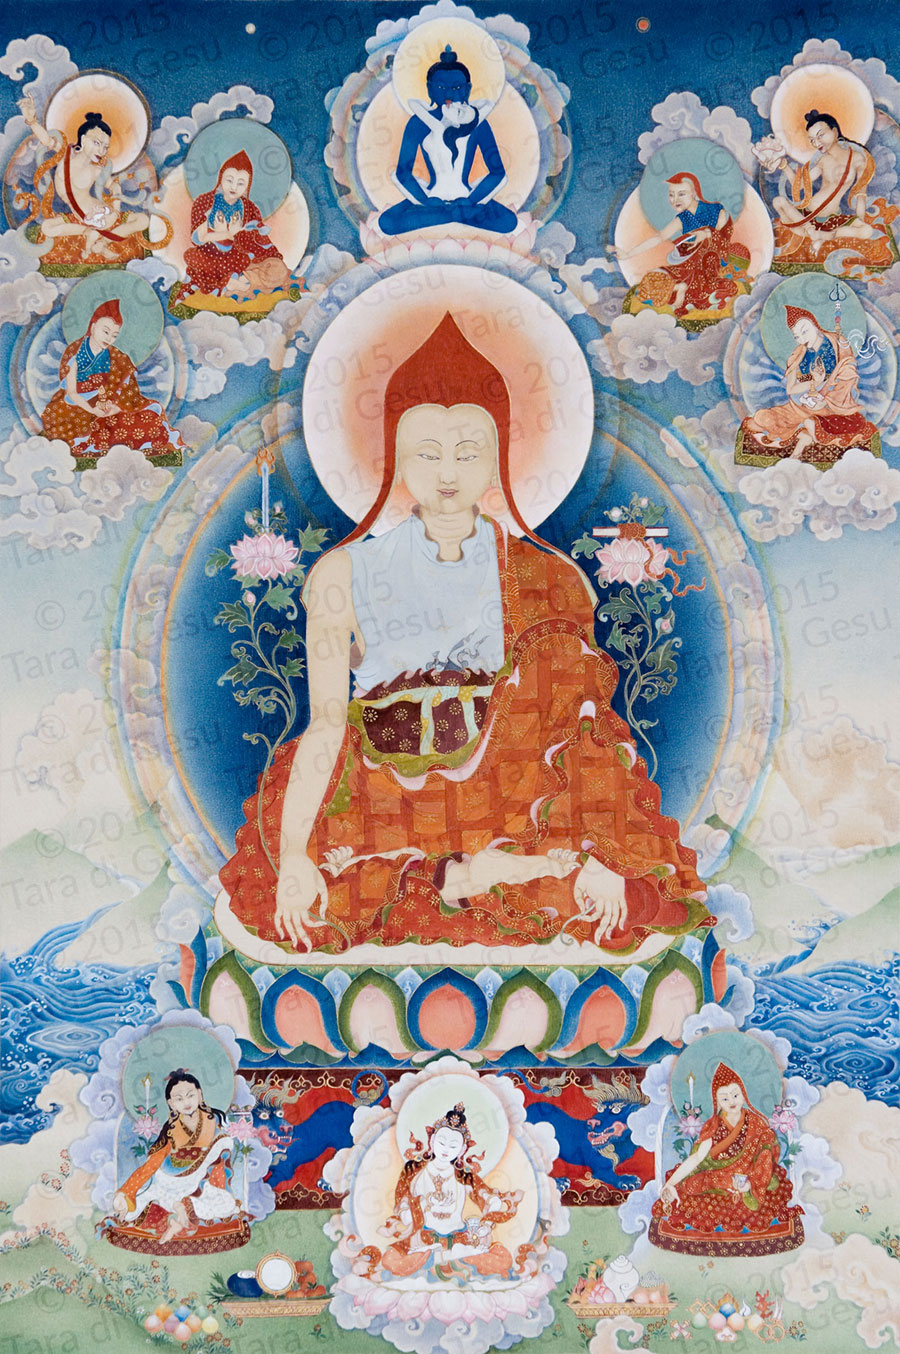 Longchenpa: Whatever thoughts arise, recognizing their essence, allow them all to be liberated as the display of your own intrinsic nature. 